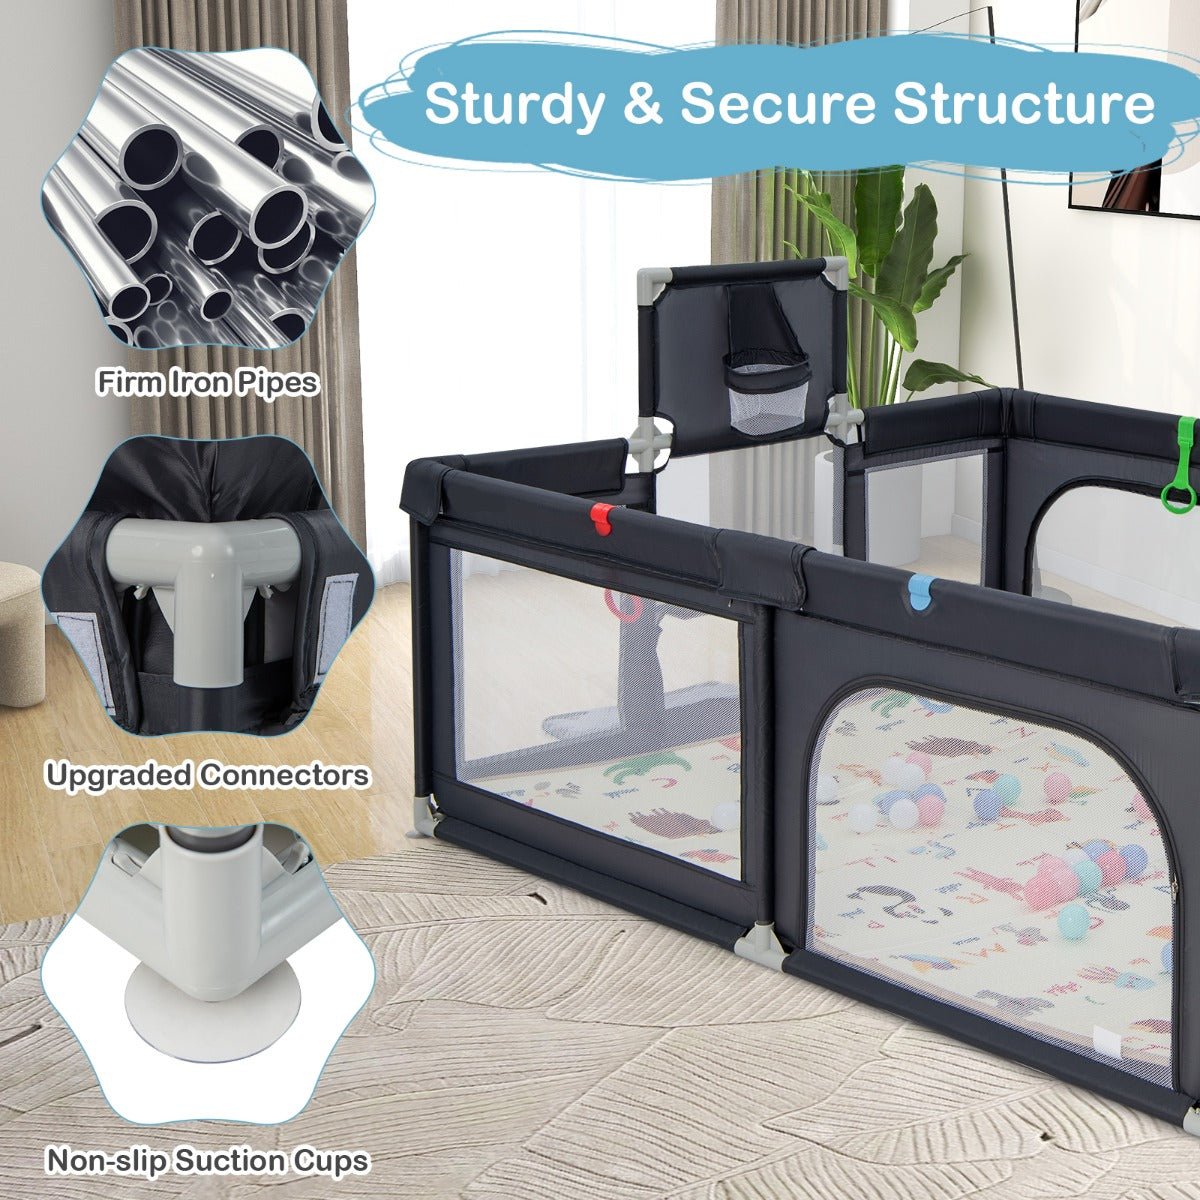 Safe and Exciting: Dark Grey Playpen for Active Toddlers